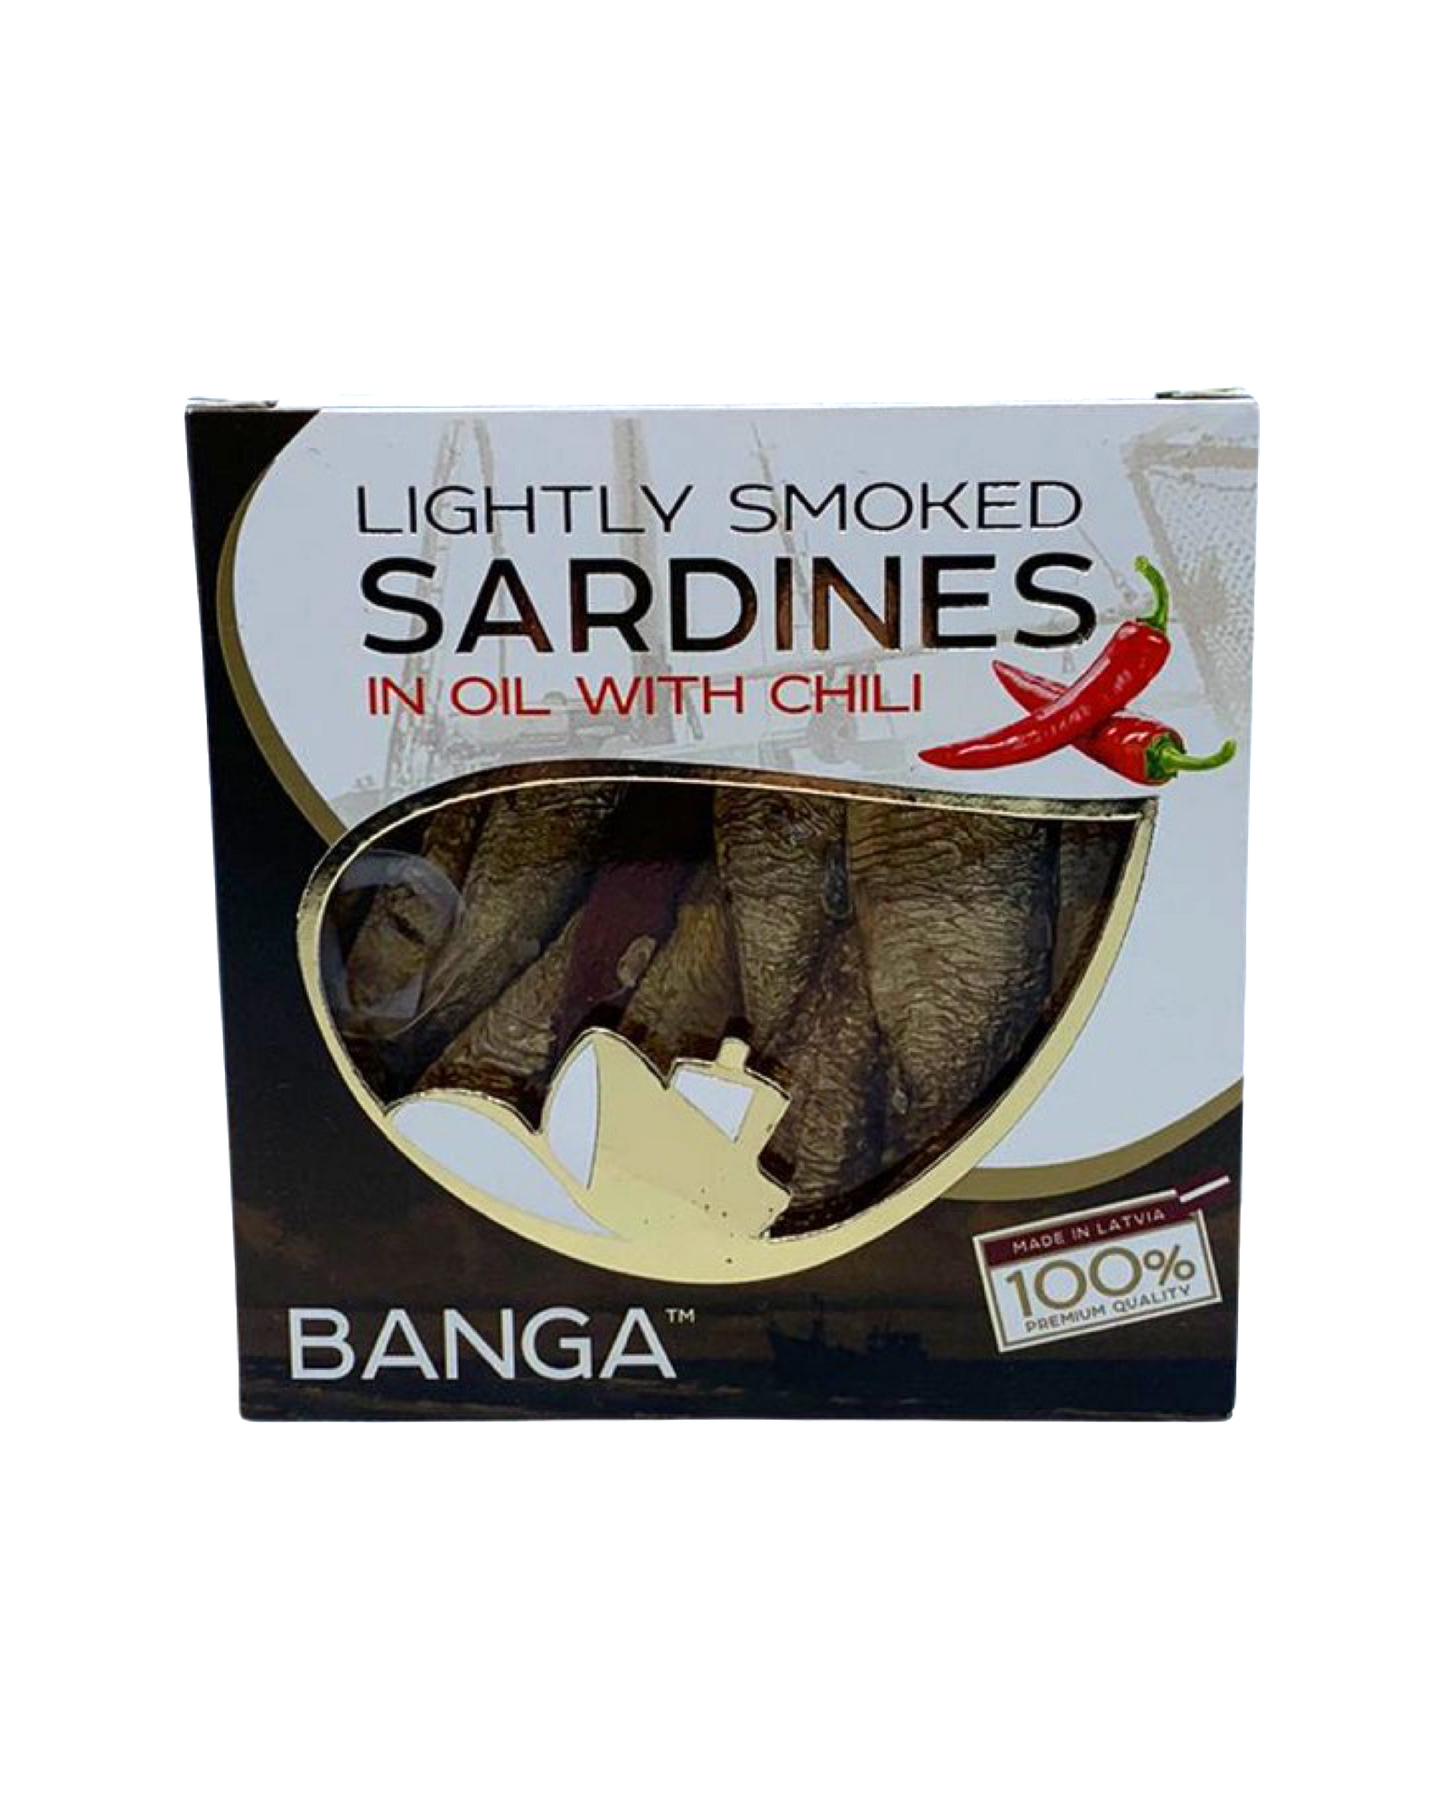 Smoked sardines in oil with chili (120g)